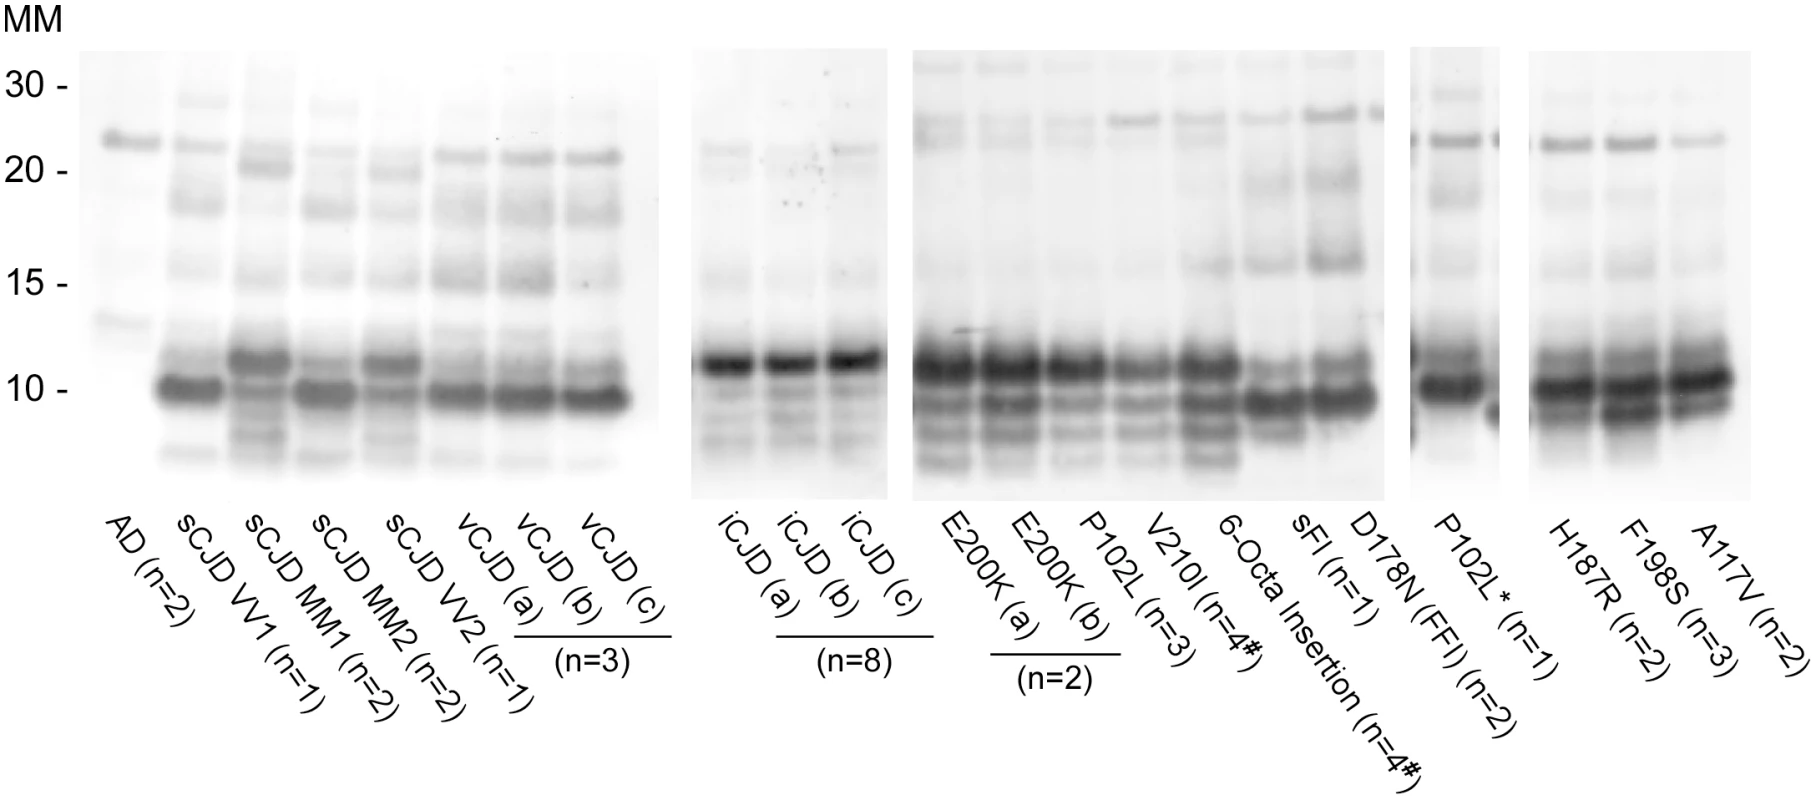 Western blot of BV rPrP<sup>Res</sup> products from RT-QuIC reactions seeded with various human prion types.